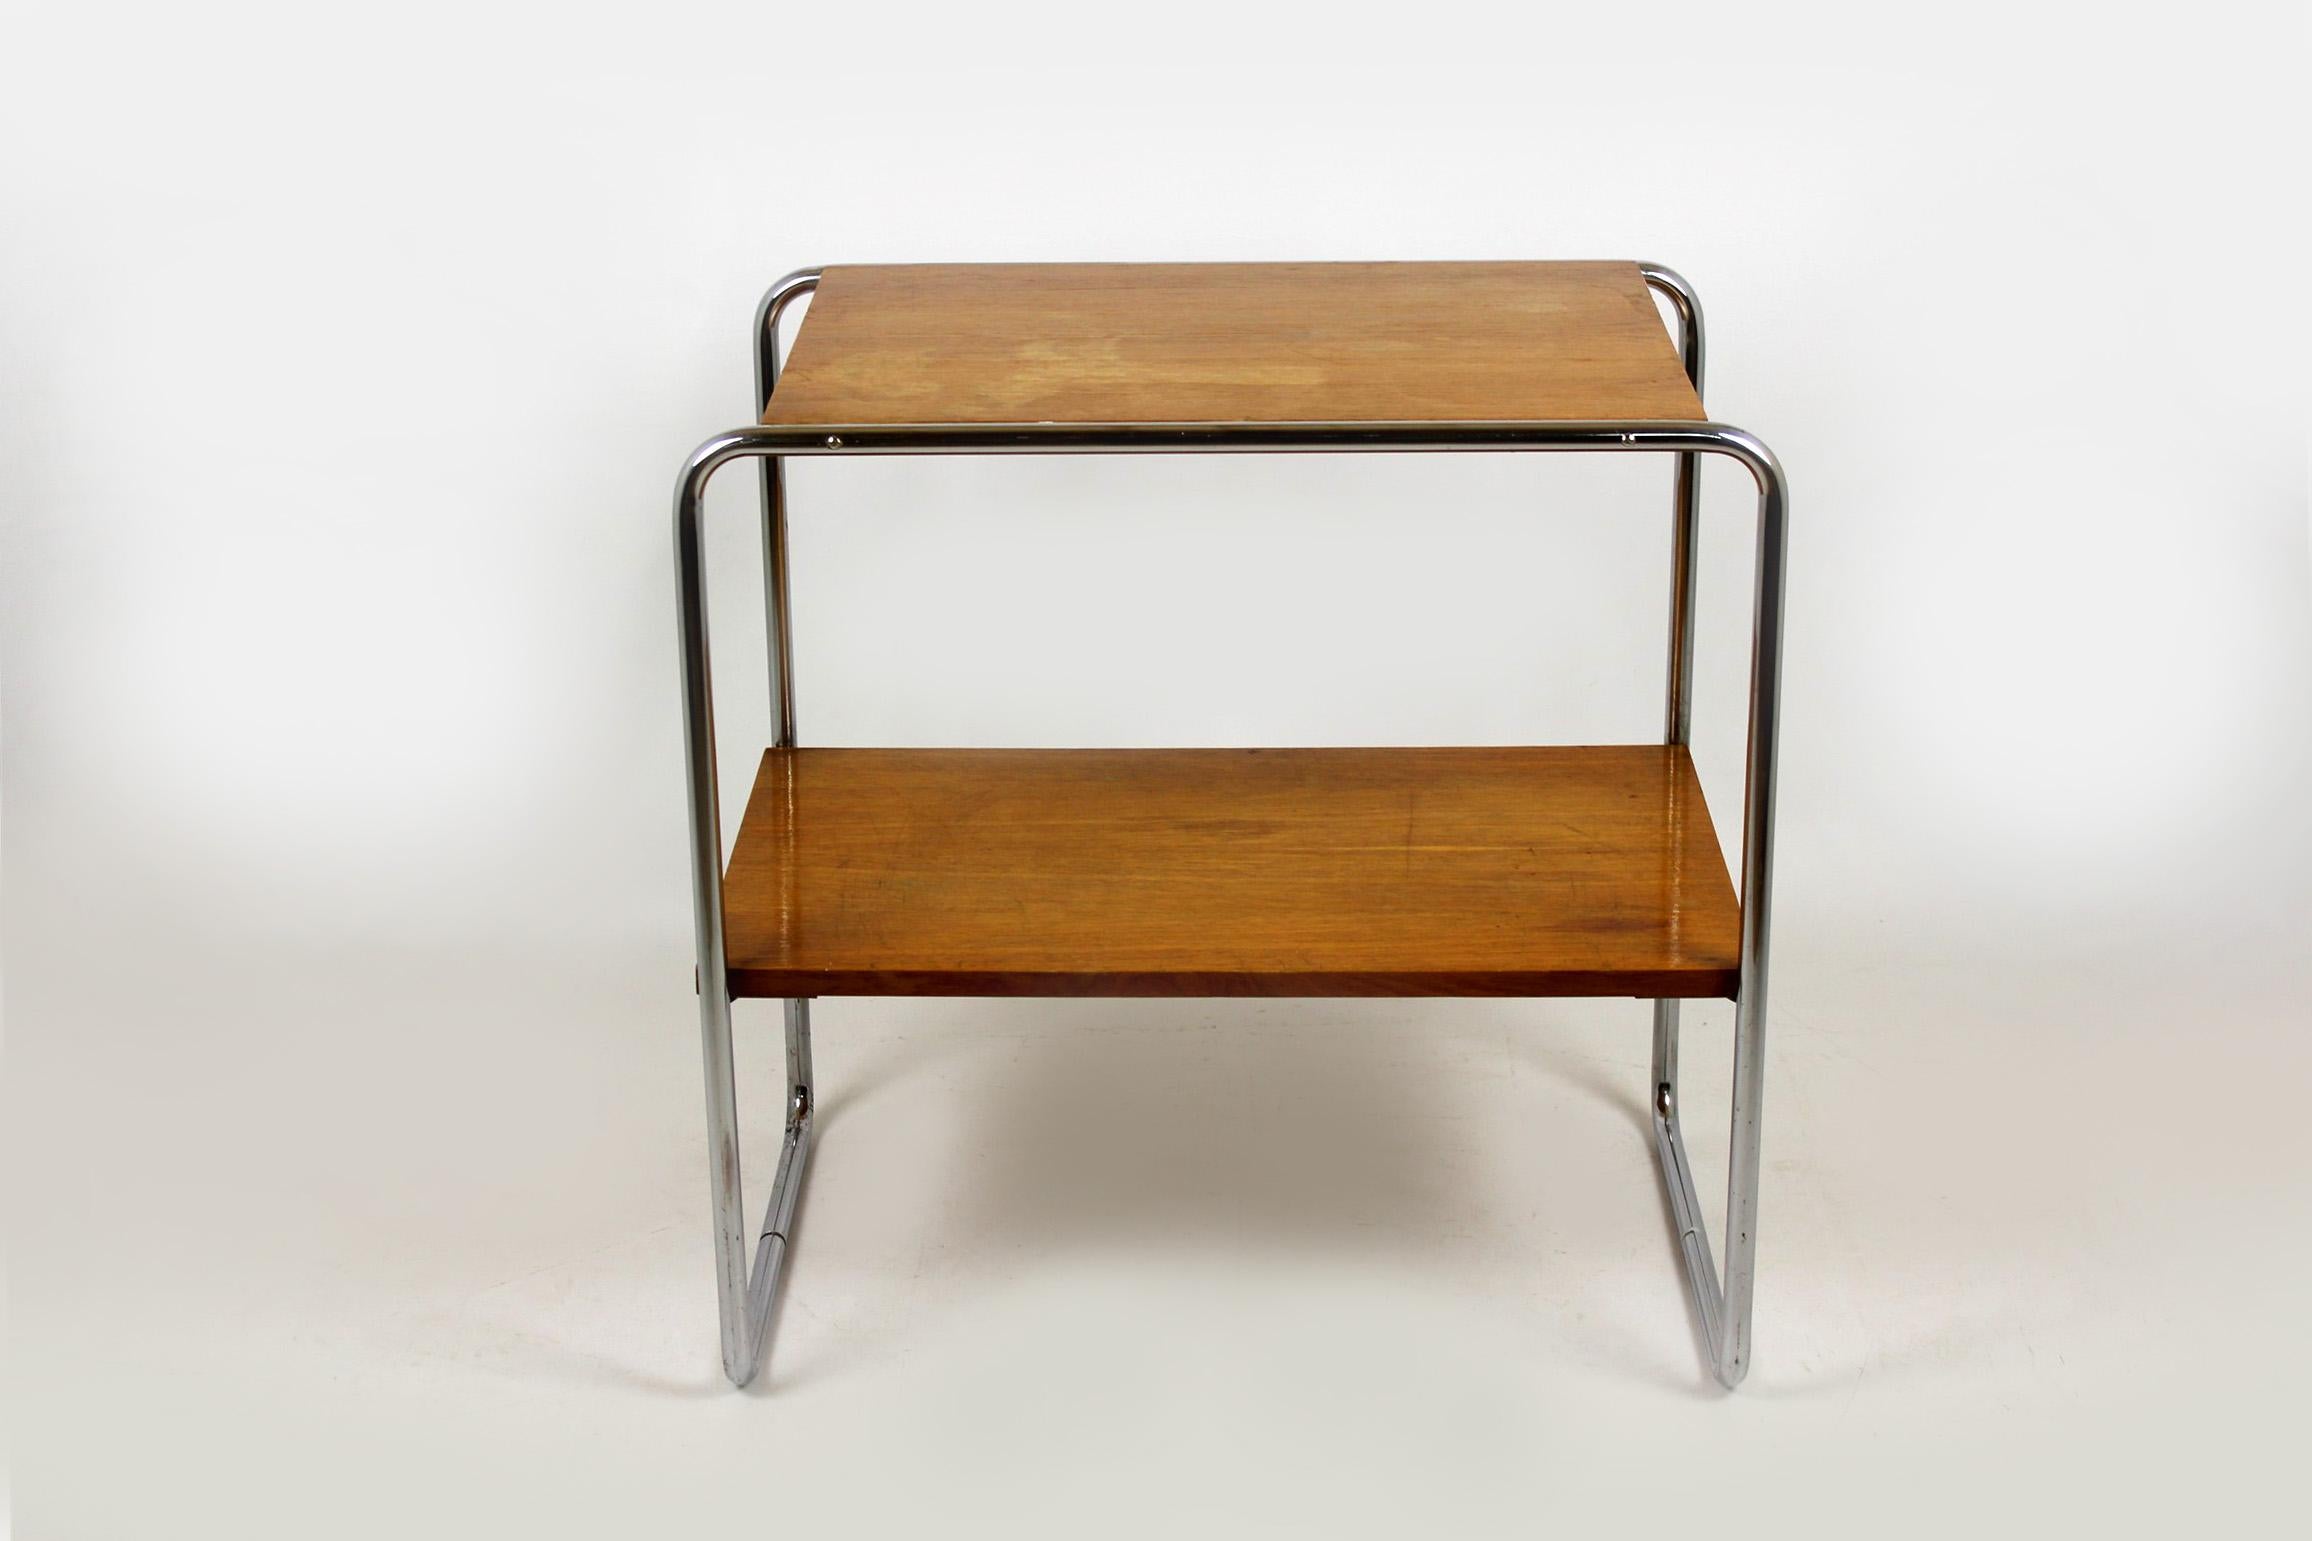 This console table (mod. B12), was designed by Marcel Breuer for Thonet in the 1930s. It features two shelves supported by a chrome tubular steel frame.